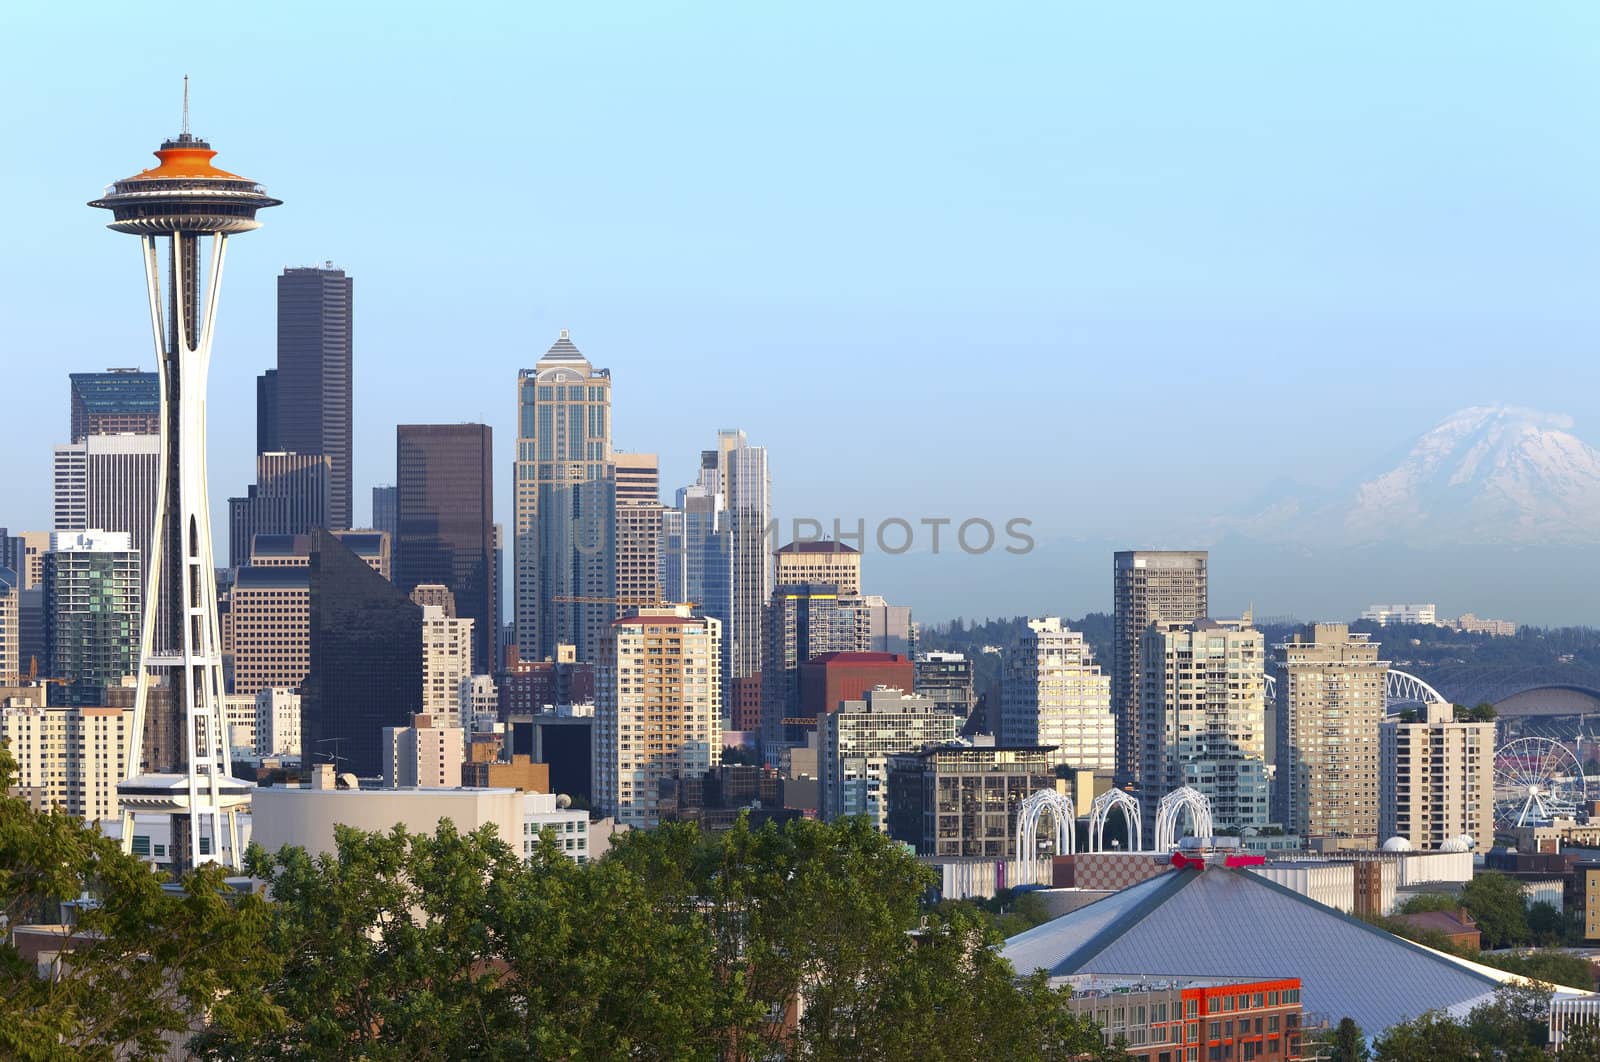 Seattle skyline and Mt. Rainier. by Rigucci